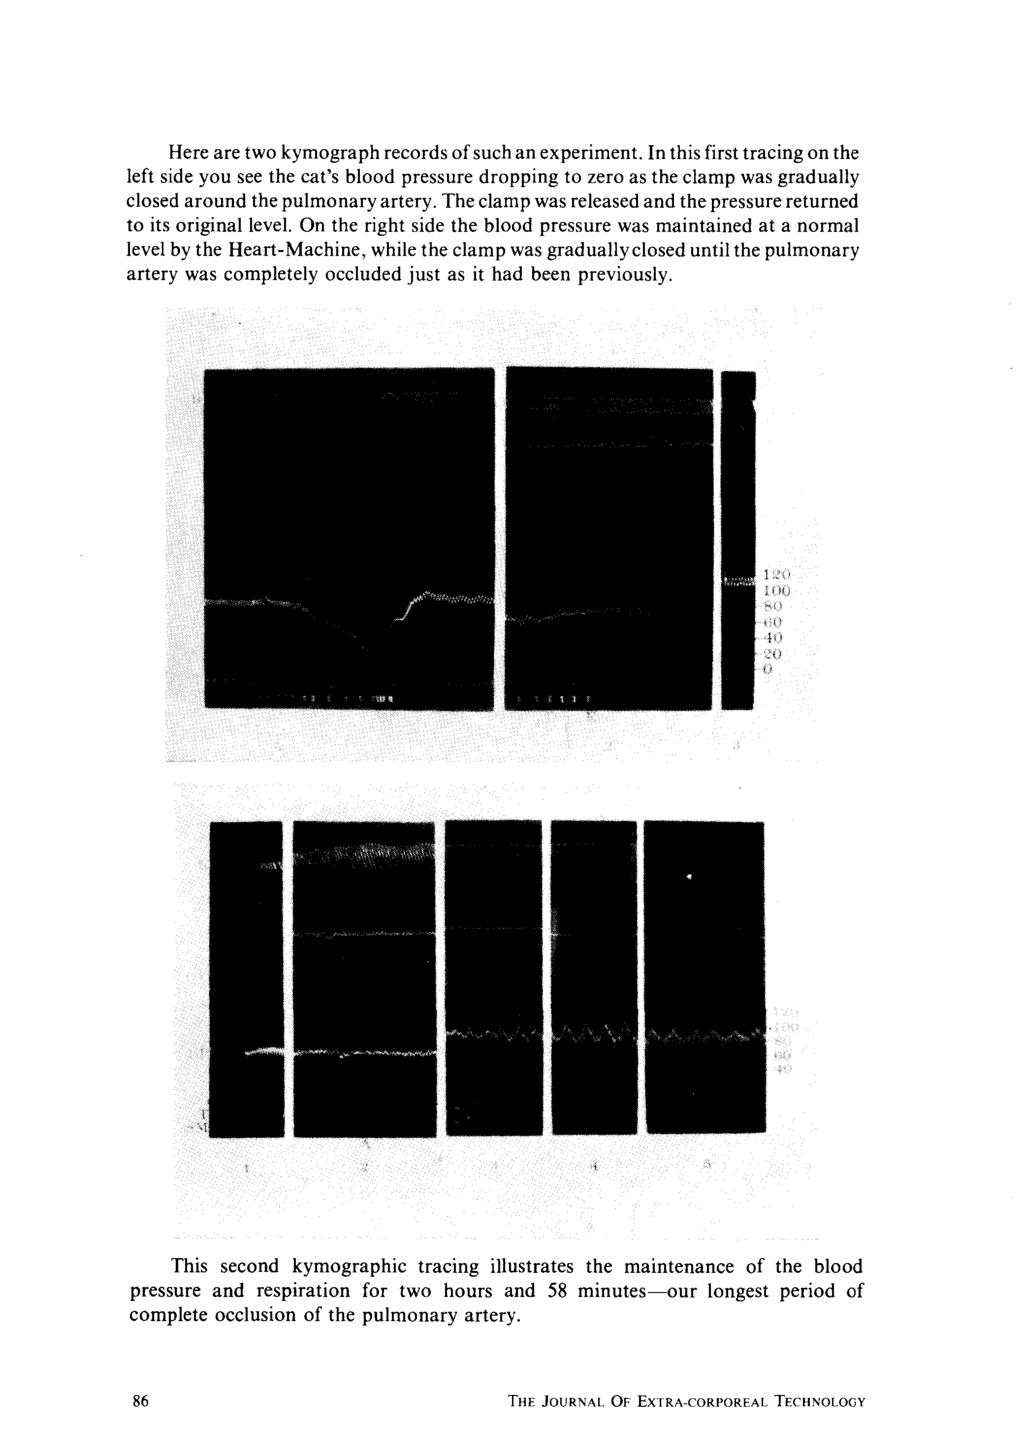 Here are two kymograph records of such an experiment.